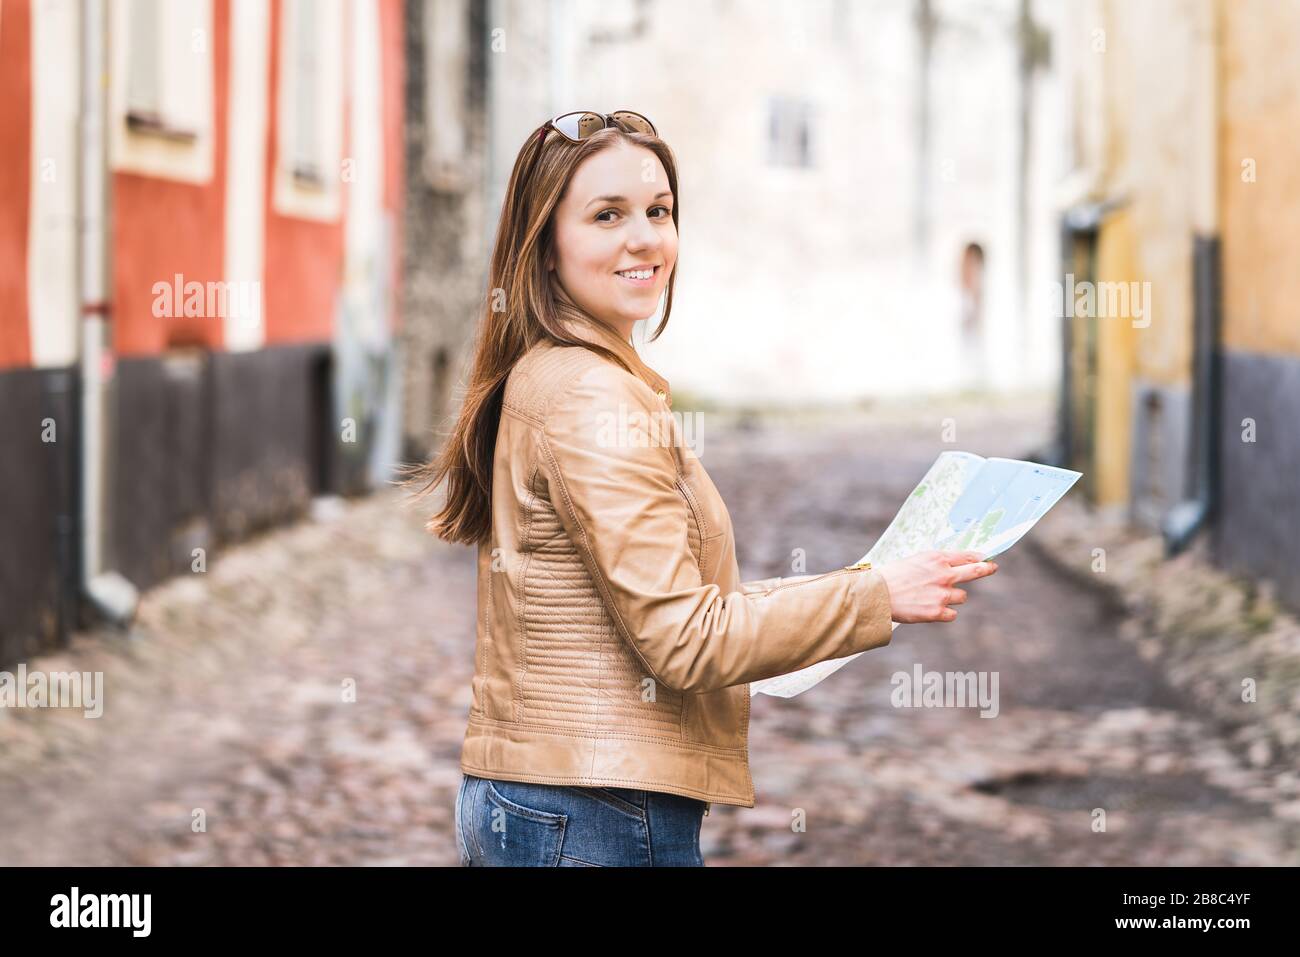 Woman with map looking straight to camera. Happy female traveler in city street or old town posing. Portrait of smiling person on vacation. Stock Photo